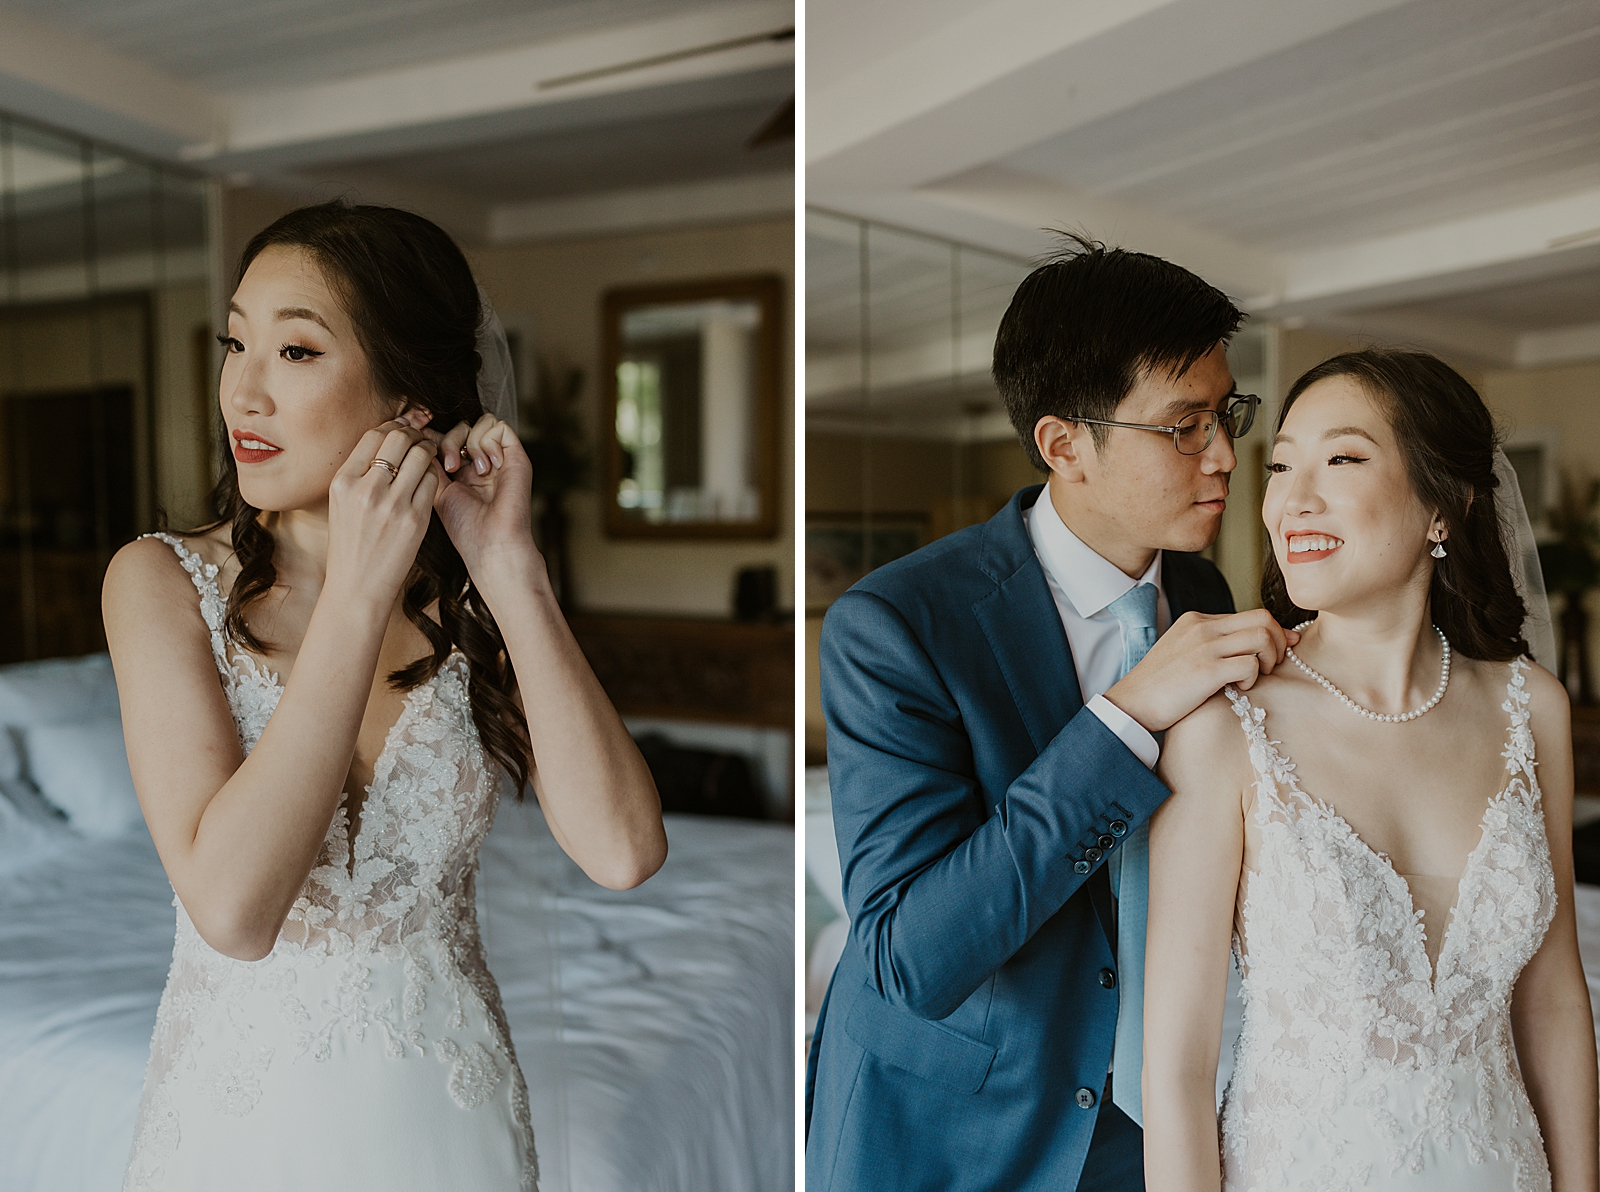 Bride putting on Jewelry in hotel room